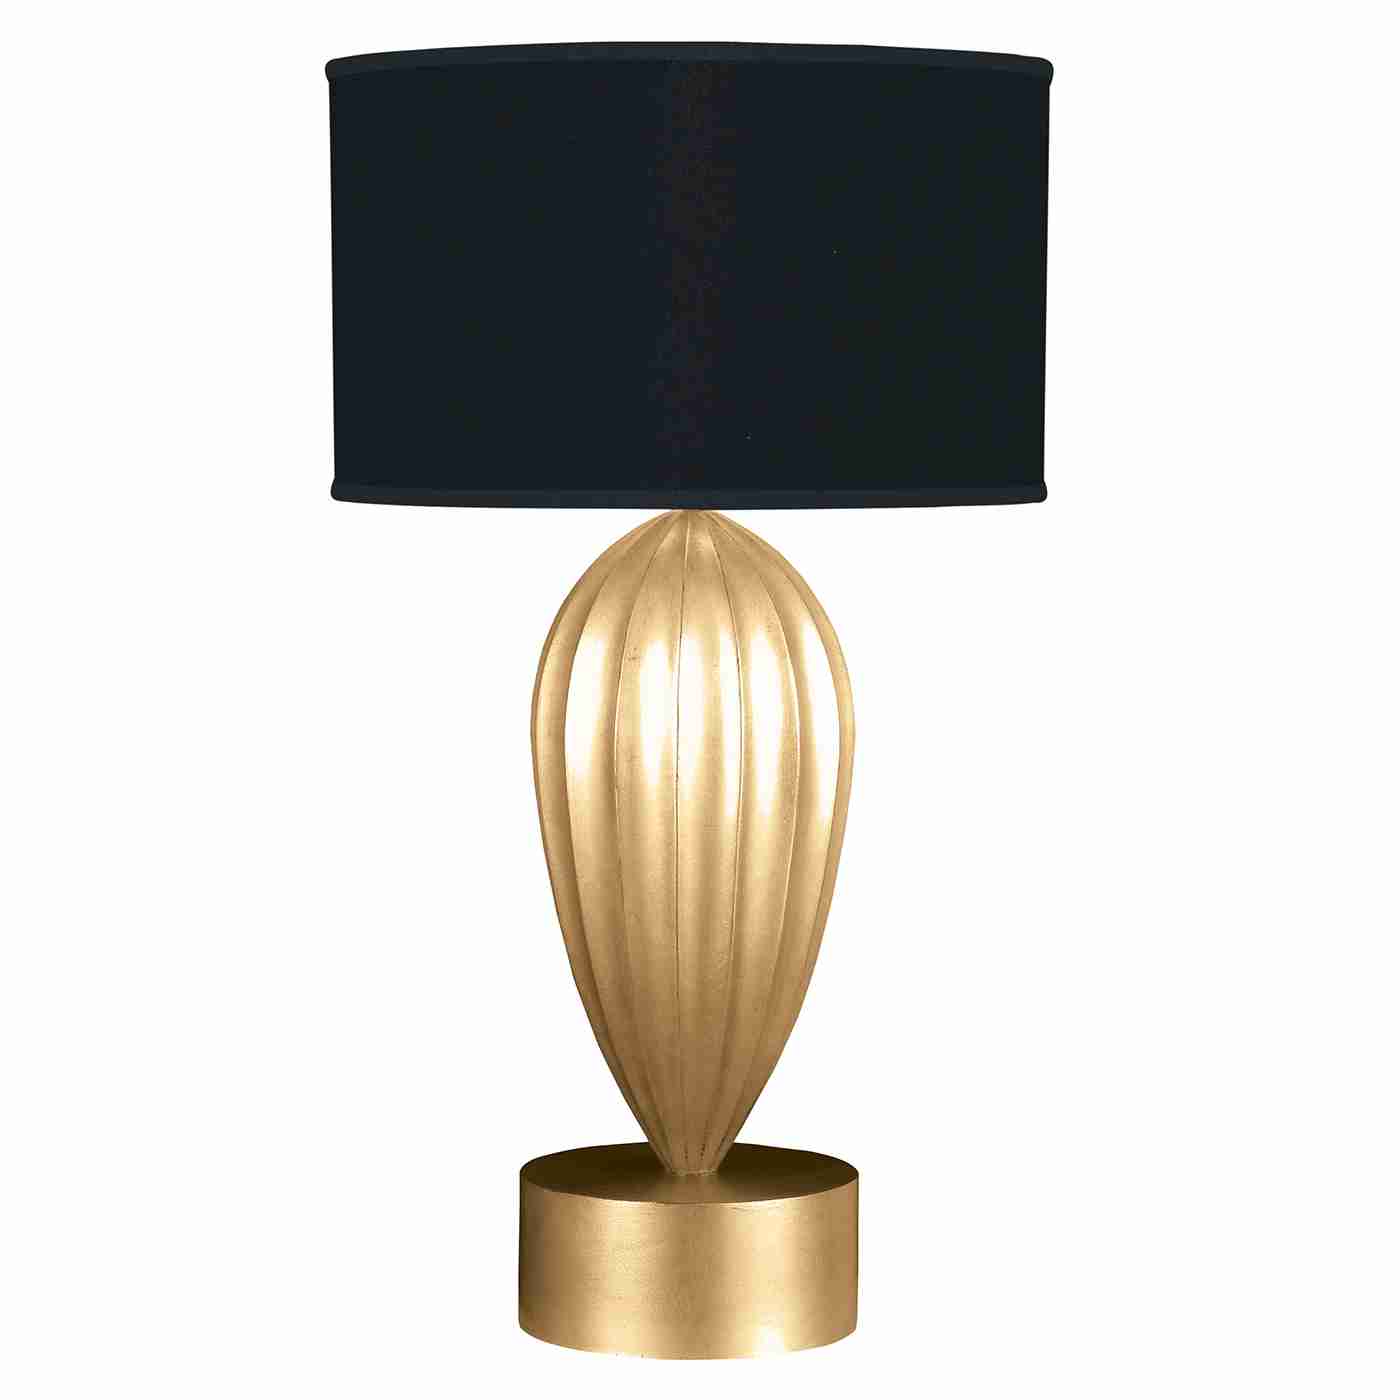 Allegretto Table Lamp Gold Leaf with Black Shade